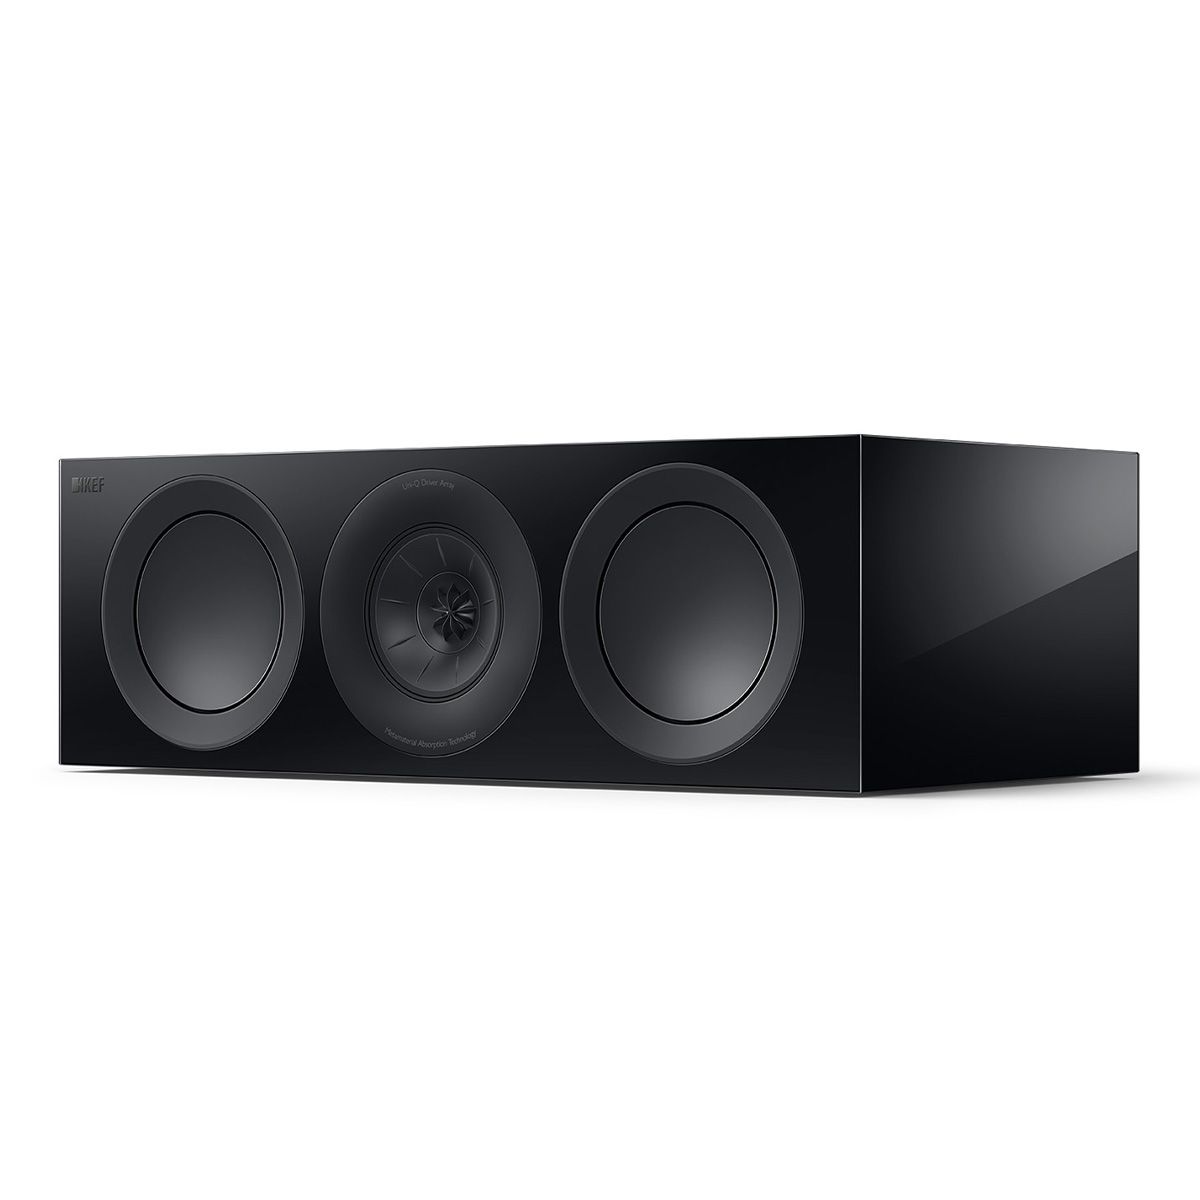 KEF R6 Meta LCR Speaker - Each black angled front view without grille